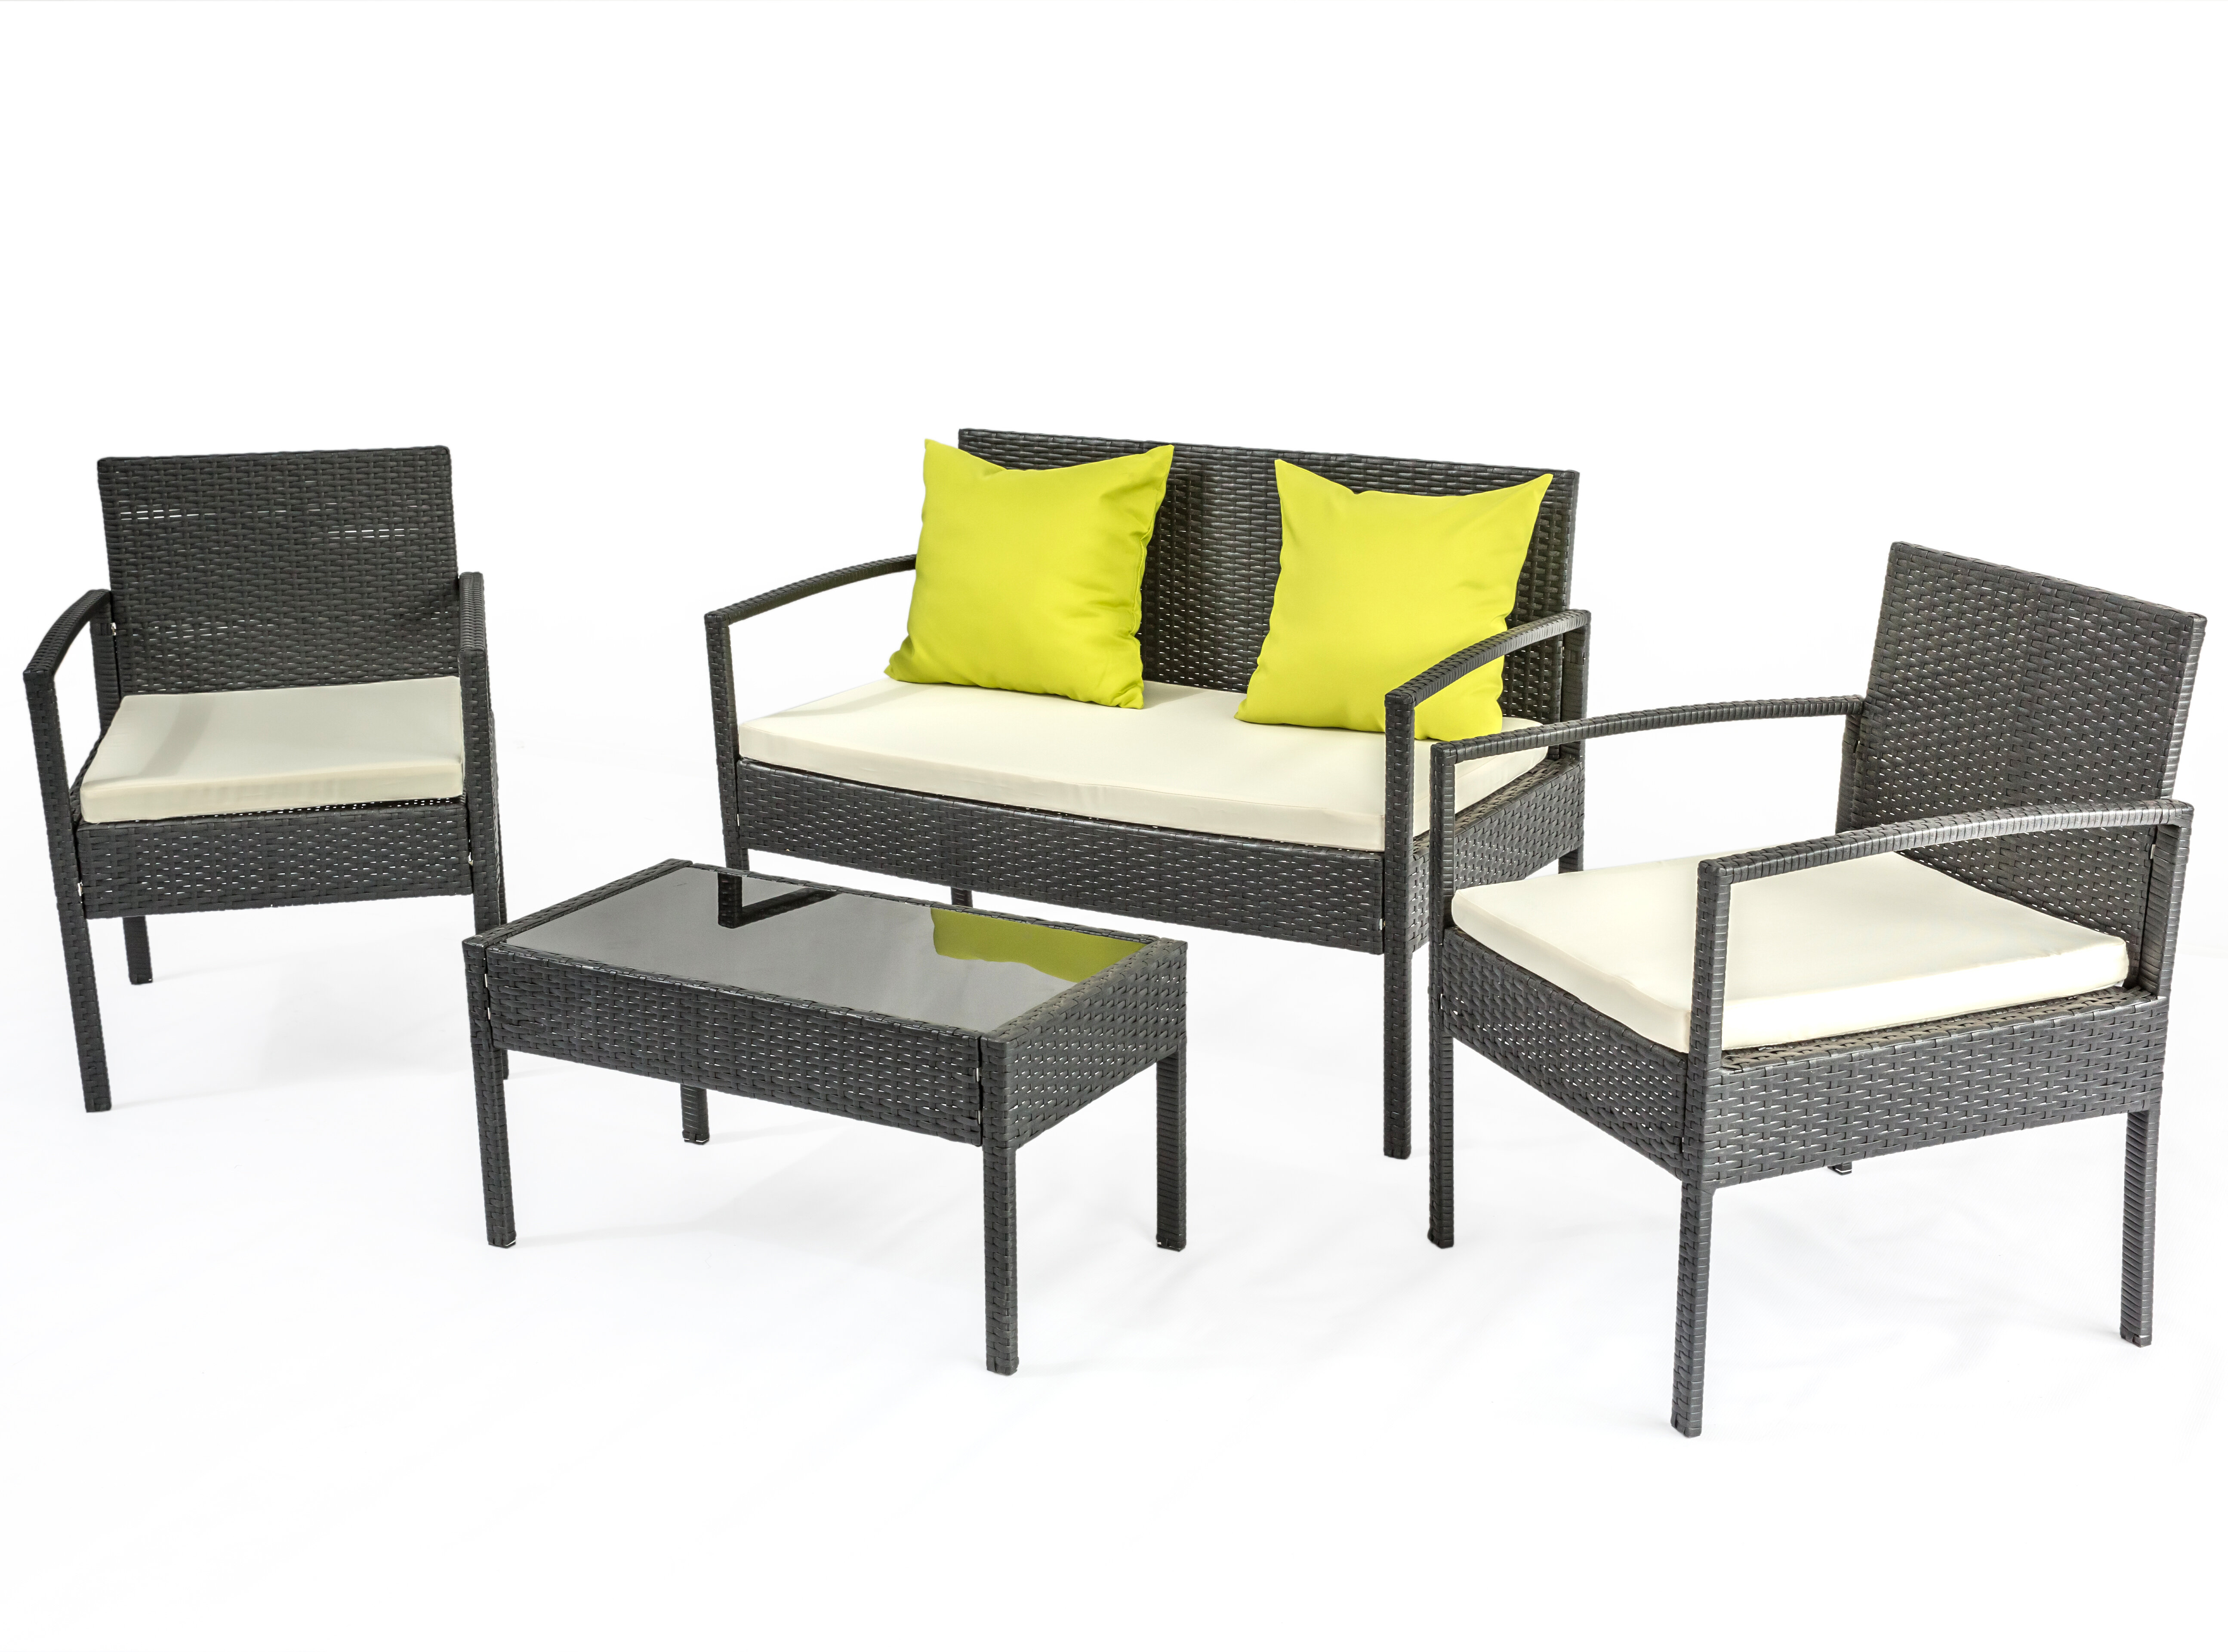 Belser All Weather 4 Piece Rattan Complete Patio Set With Cushions with regard to size 5179 X 3840